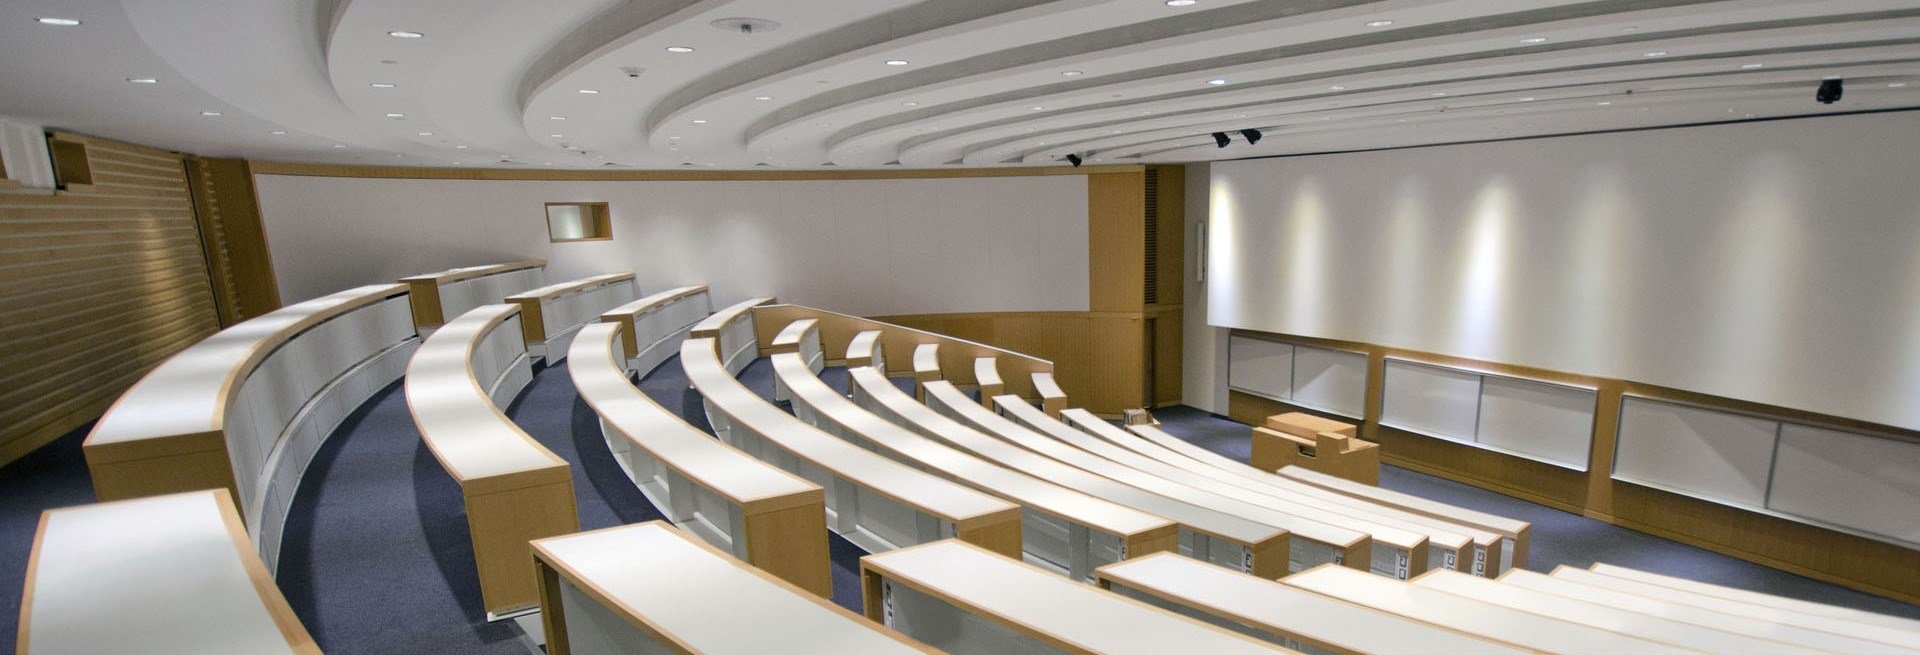 Empty lecture hall of 15 rows and a speaking podium